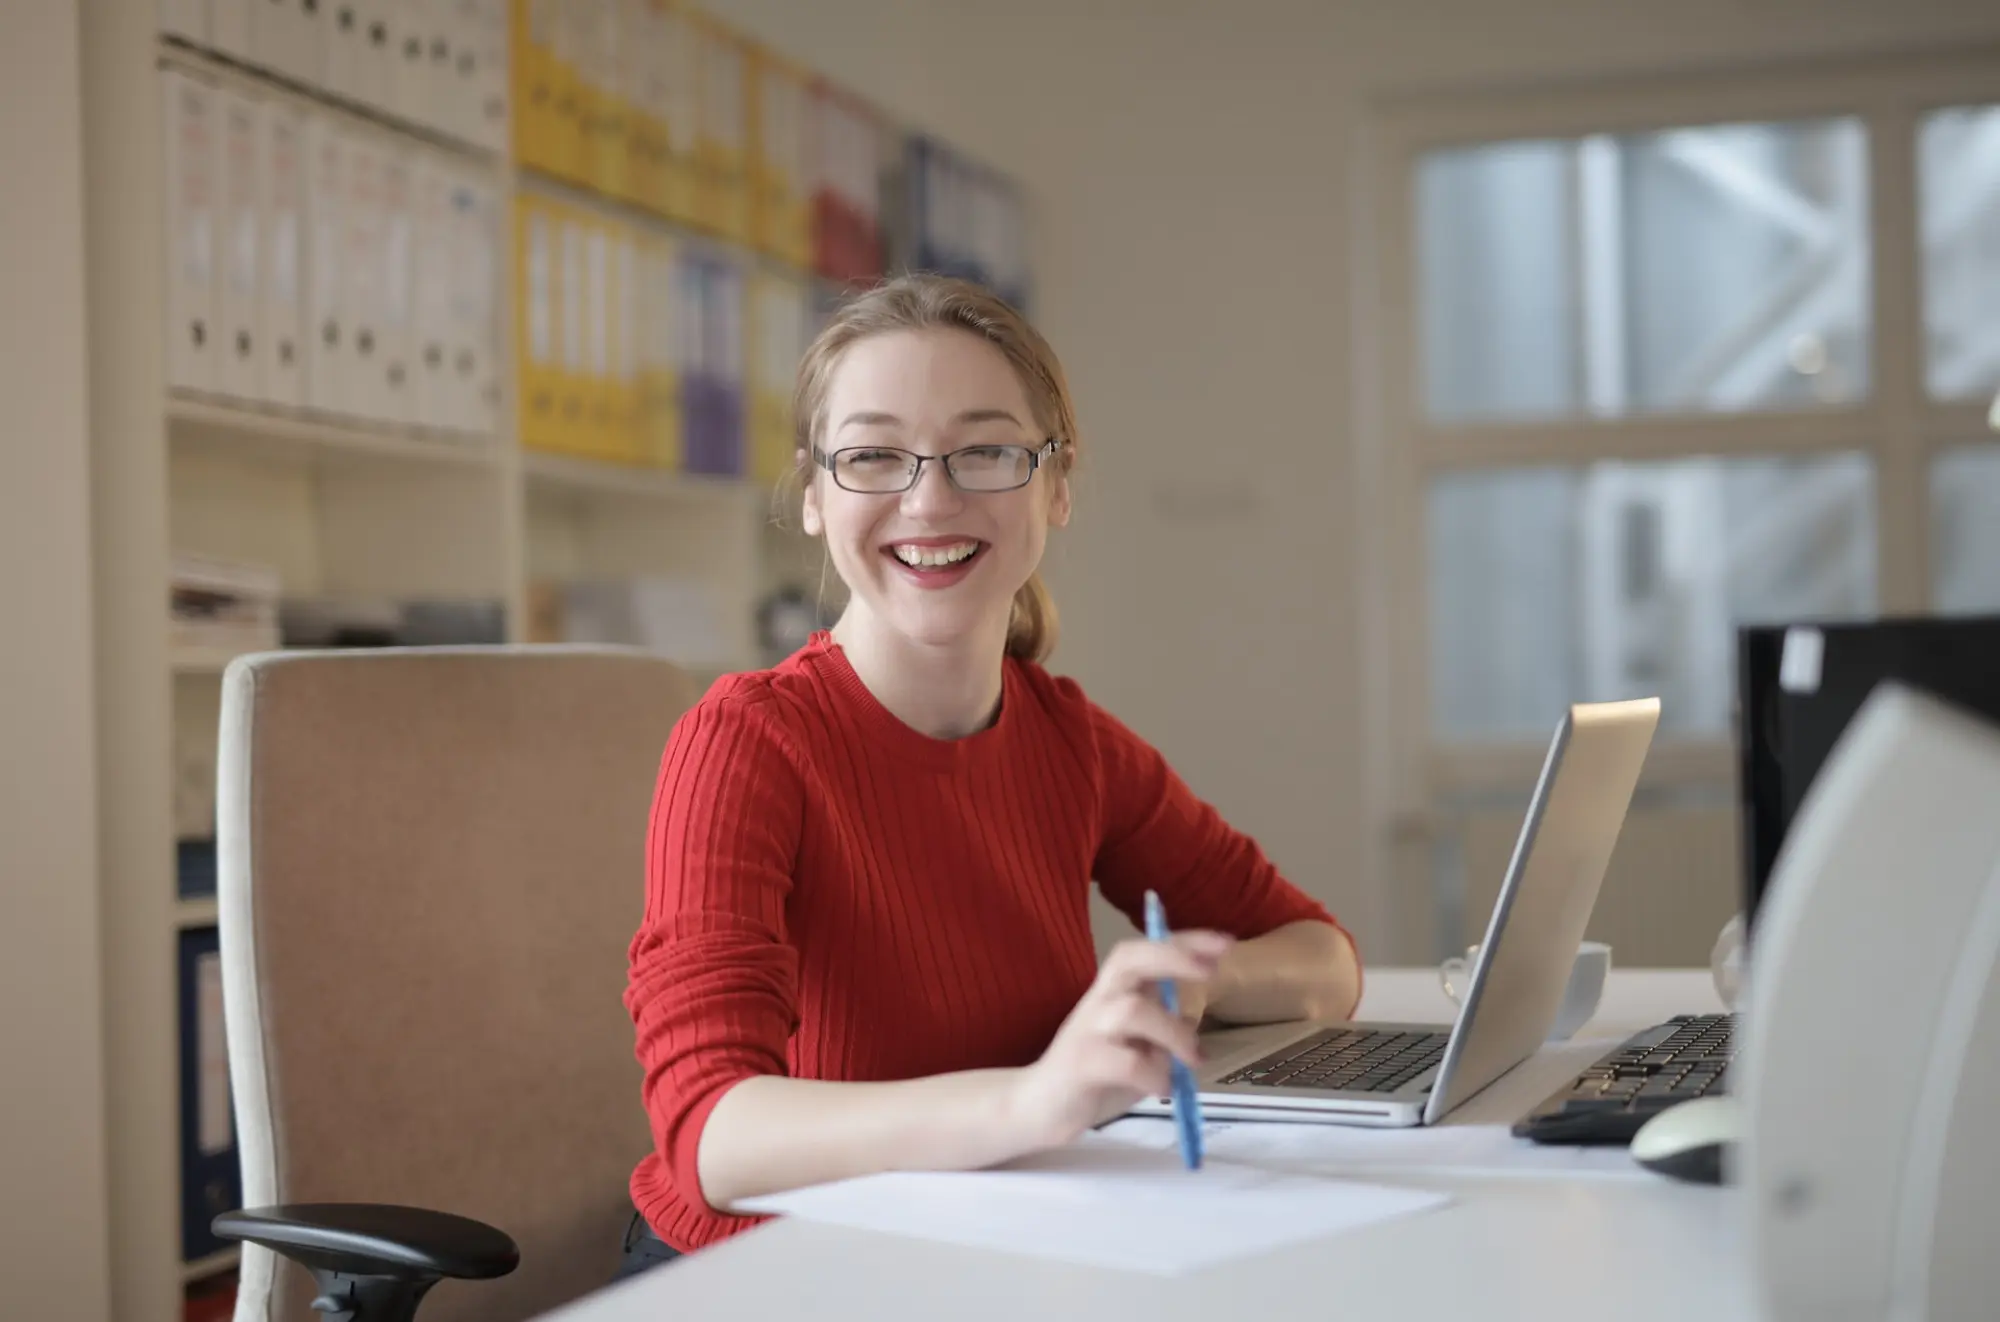 woman smiling while at desk